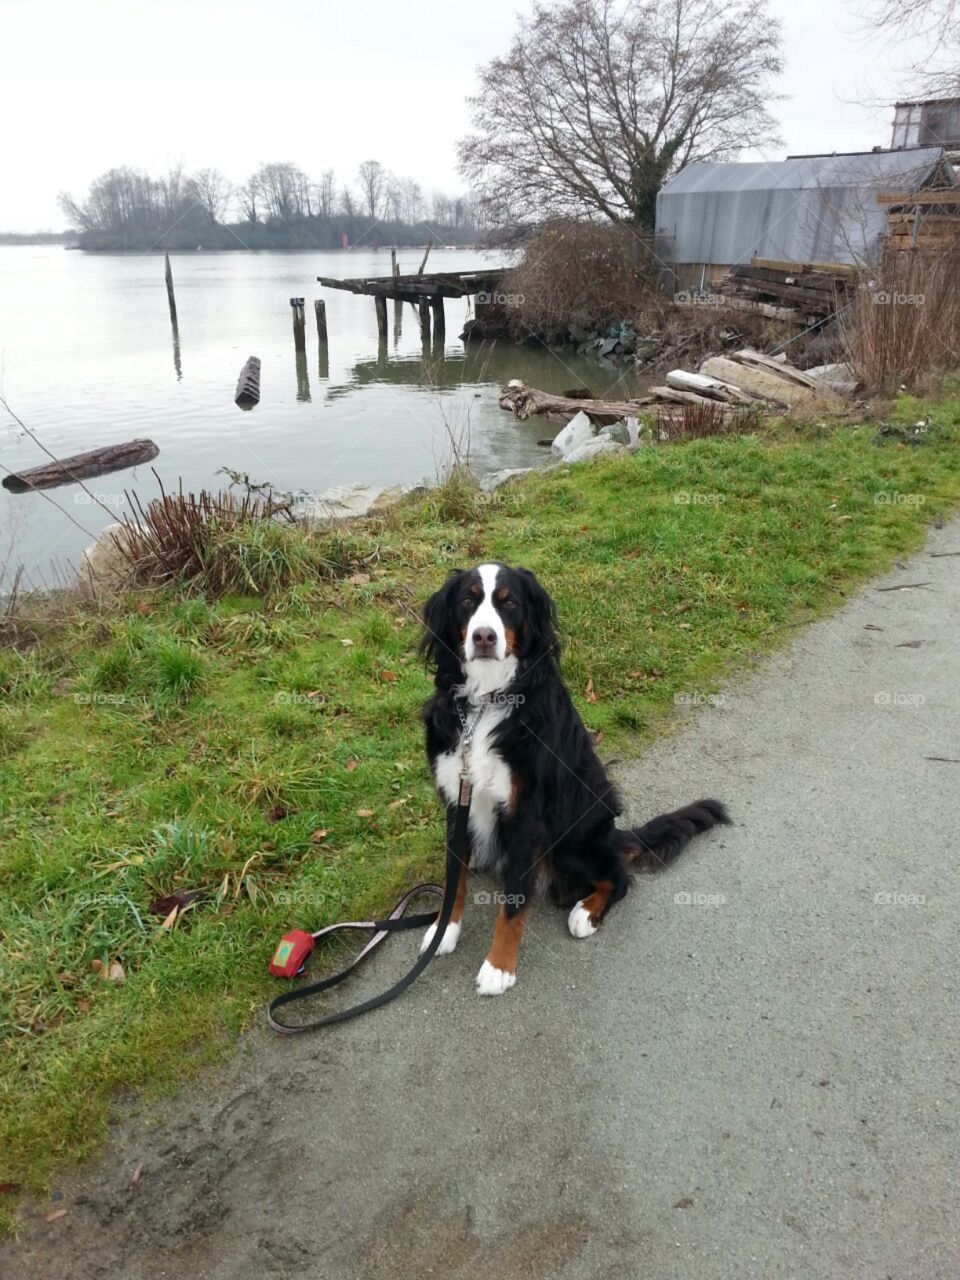 Bernese Mountain dog, Cassie, takes us on a tour along the Fraser River during the Autumn foliage in Vancouver, British Columbia.